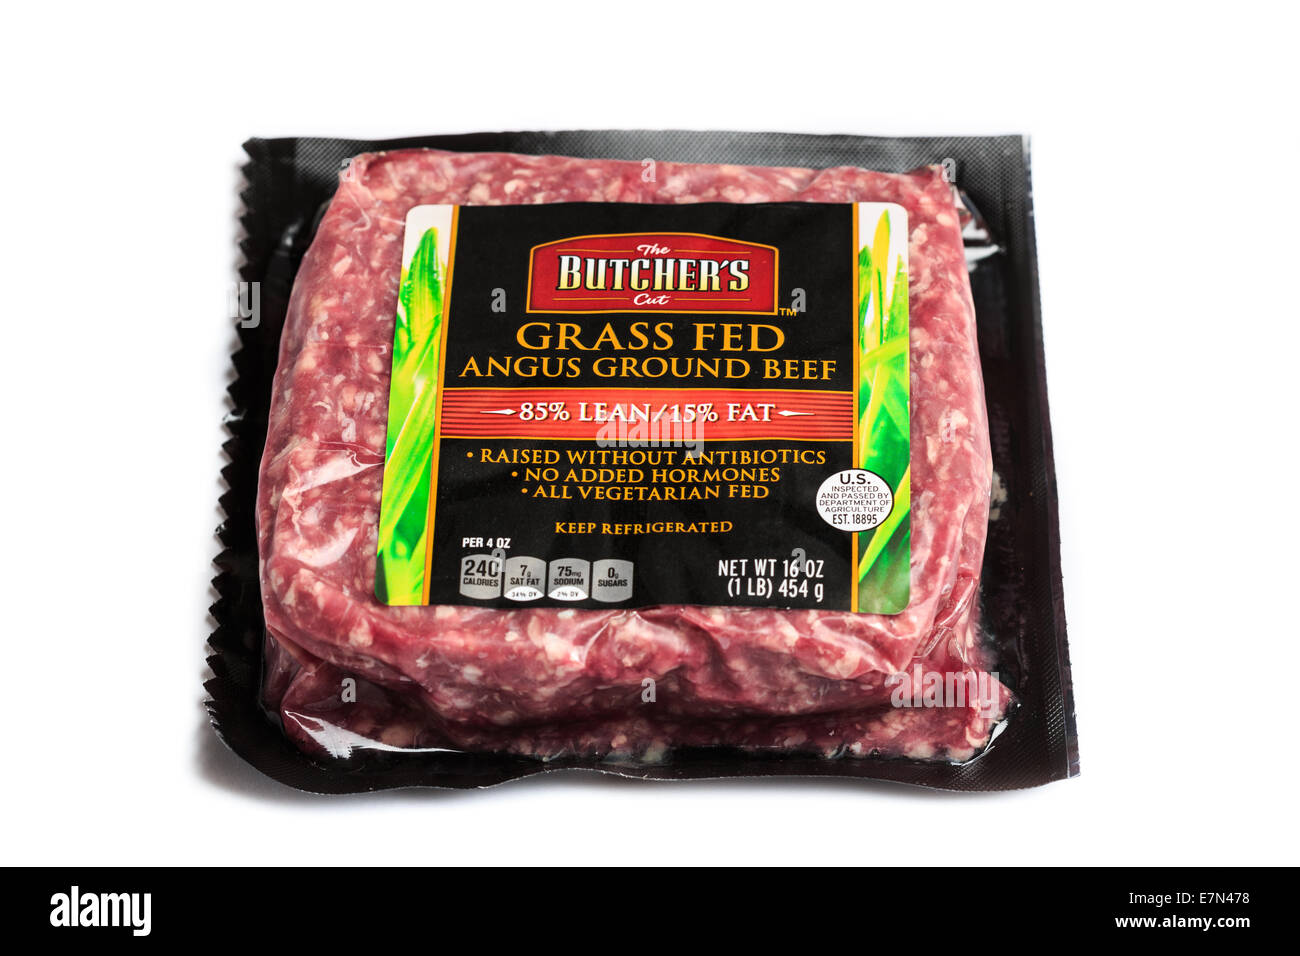 The Butcher's Cut Grass Fed Angus Ground Beef Stock Photo